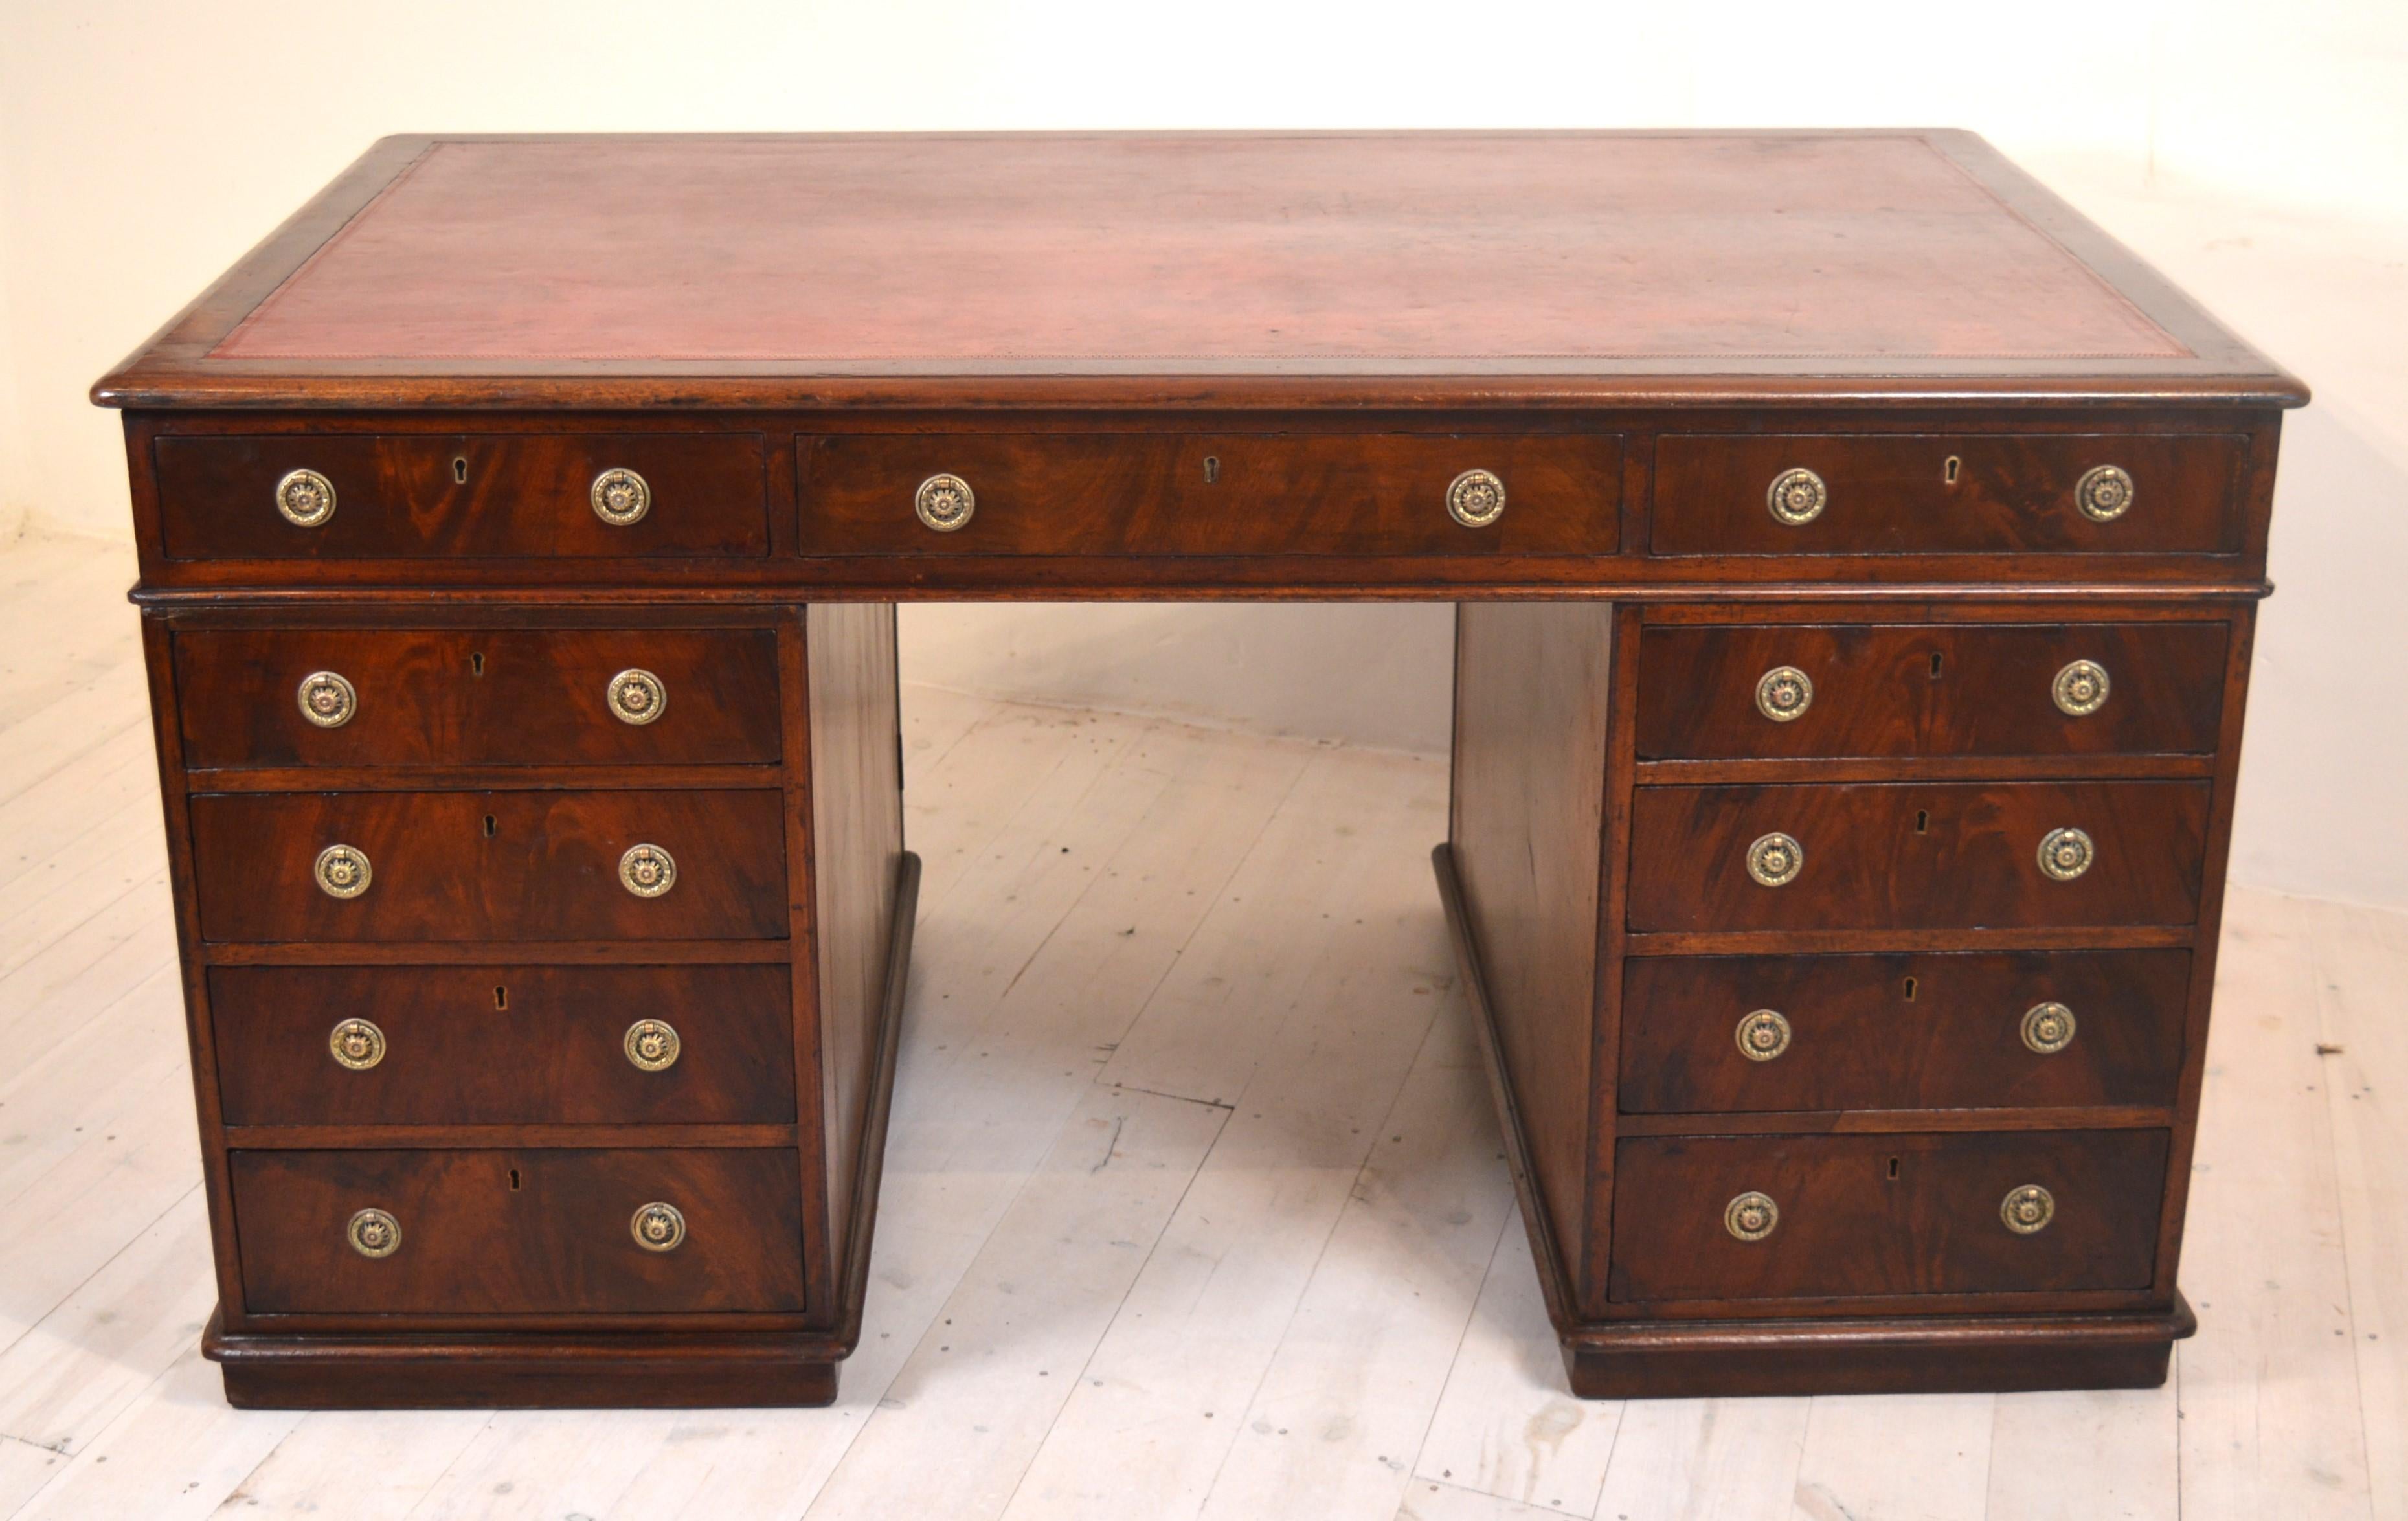 A 19th century mahogany partners desk of good colour with 14 drawers and two lockable cupboards. The drawers are Honduras mahogany and have a covering in  blue sugar paper, and the top has original red leather. The handles are in keeping but 